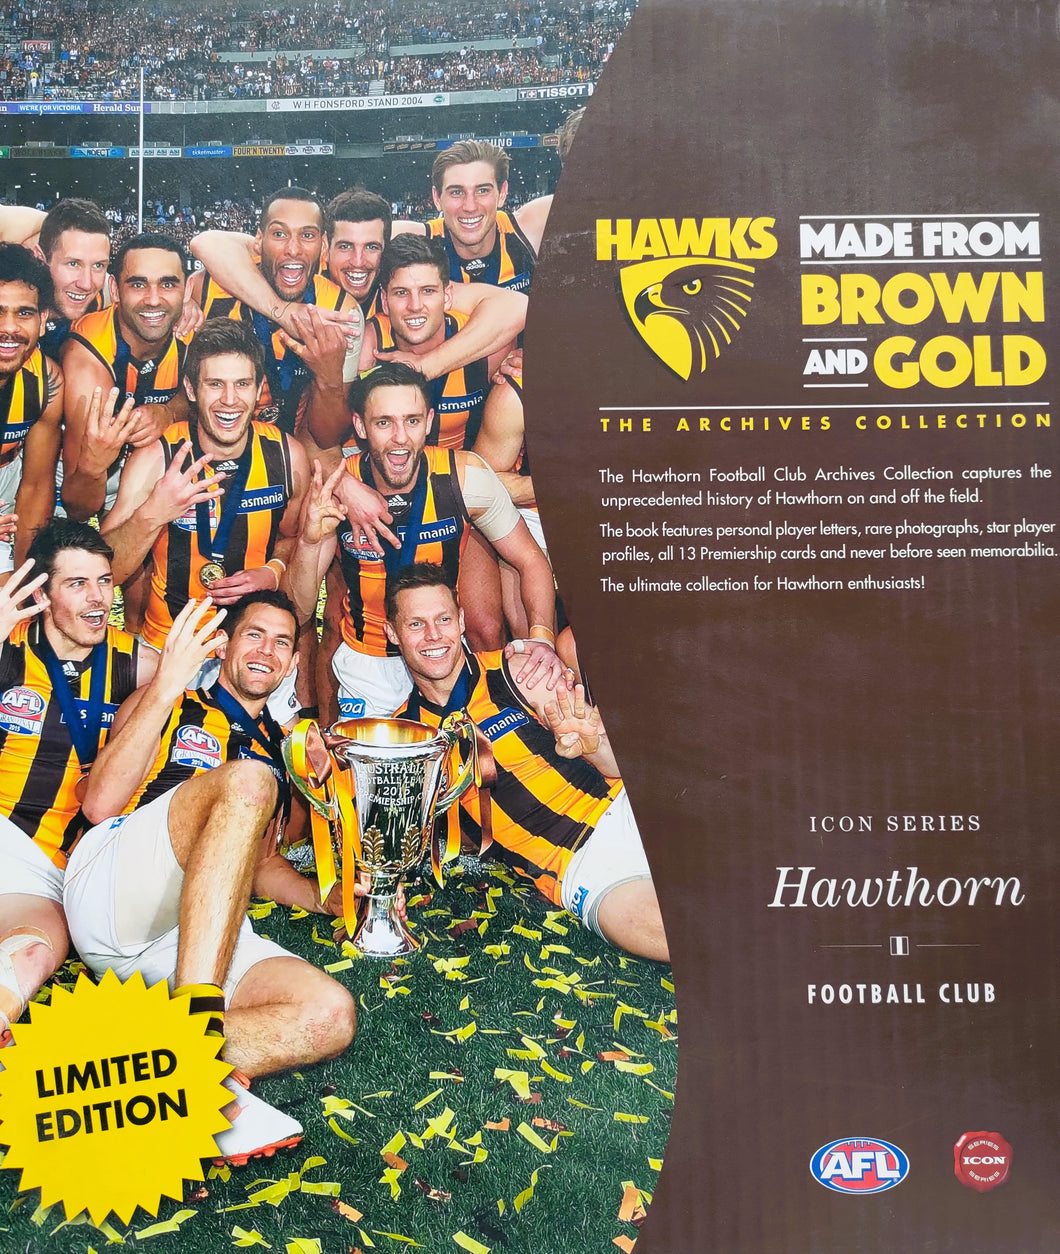 HAWKS Made from Brown and Gold Hawthorn Football Club AFL